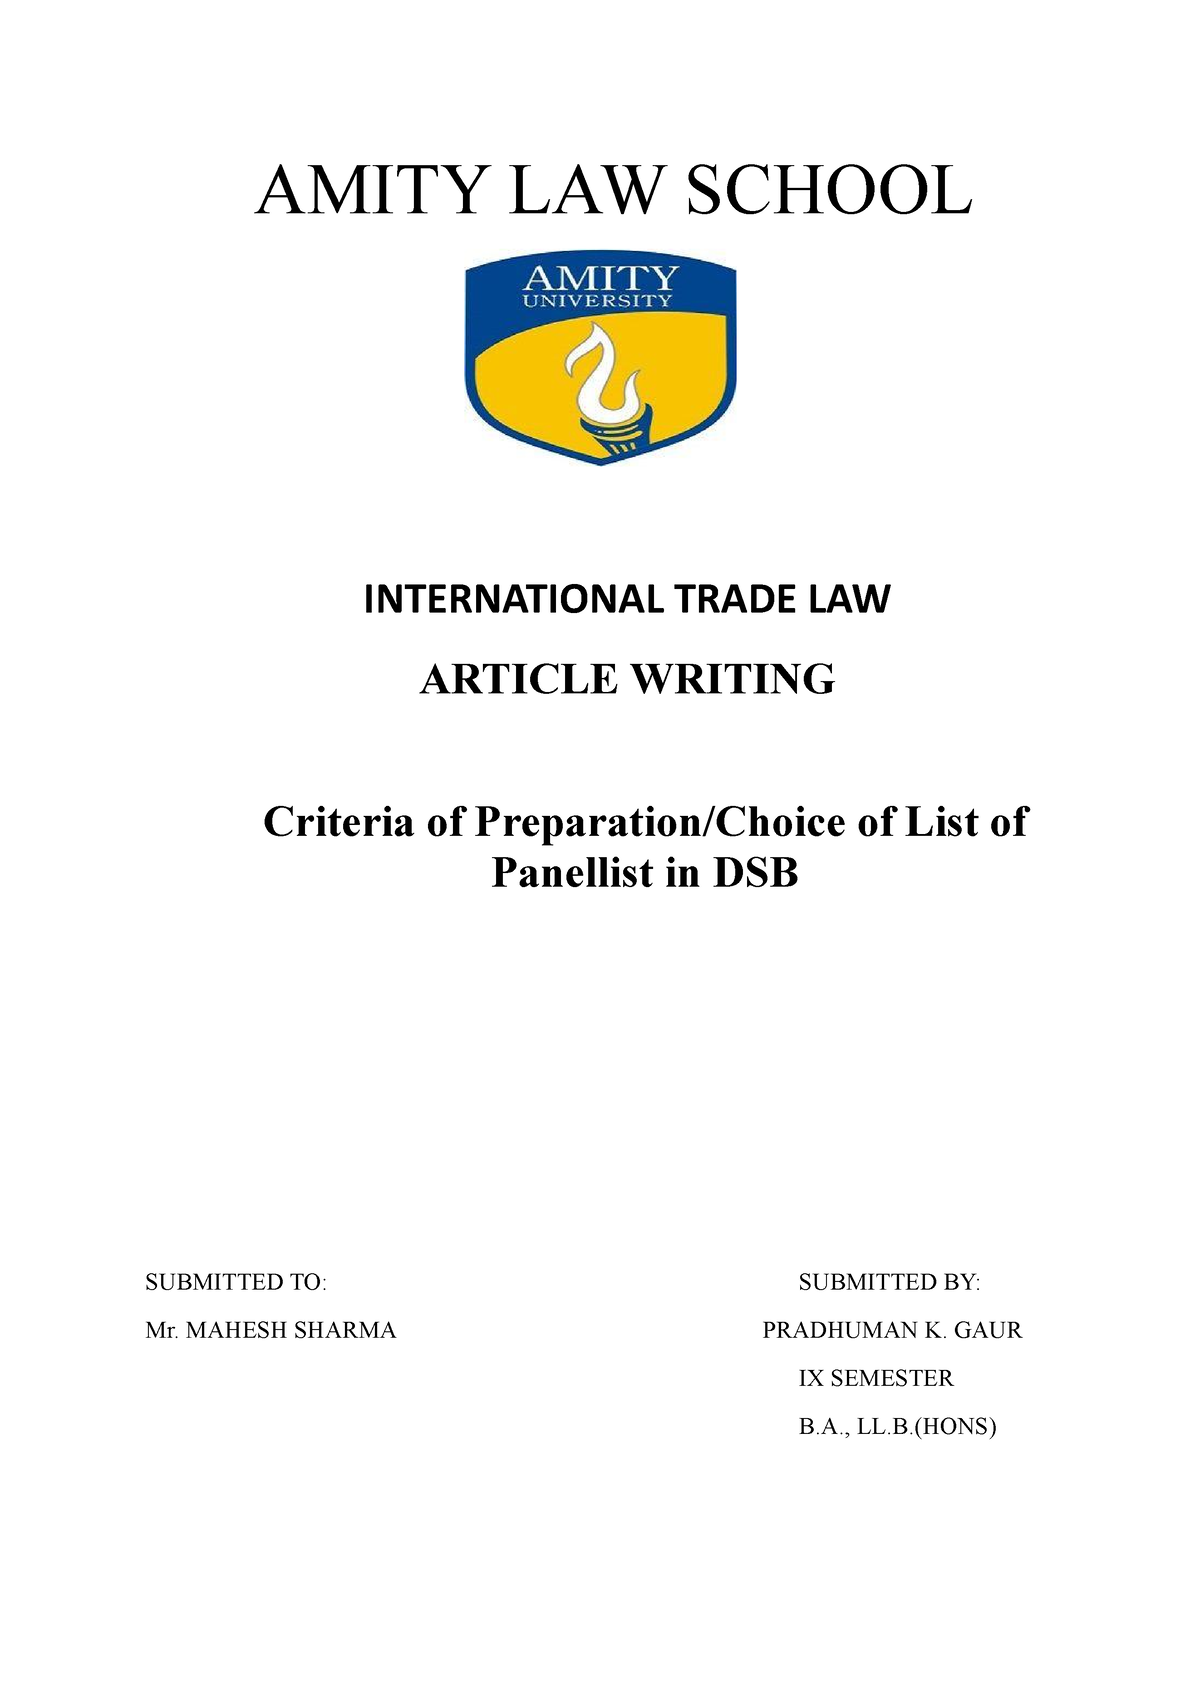 research papers on international trade law